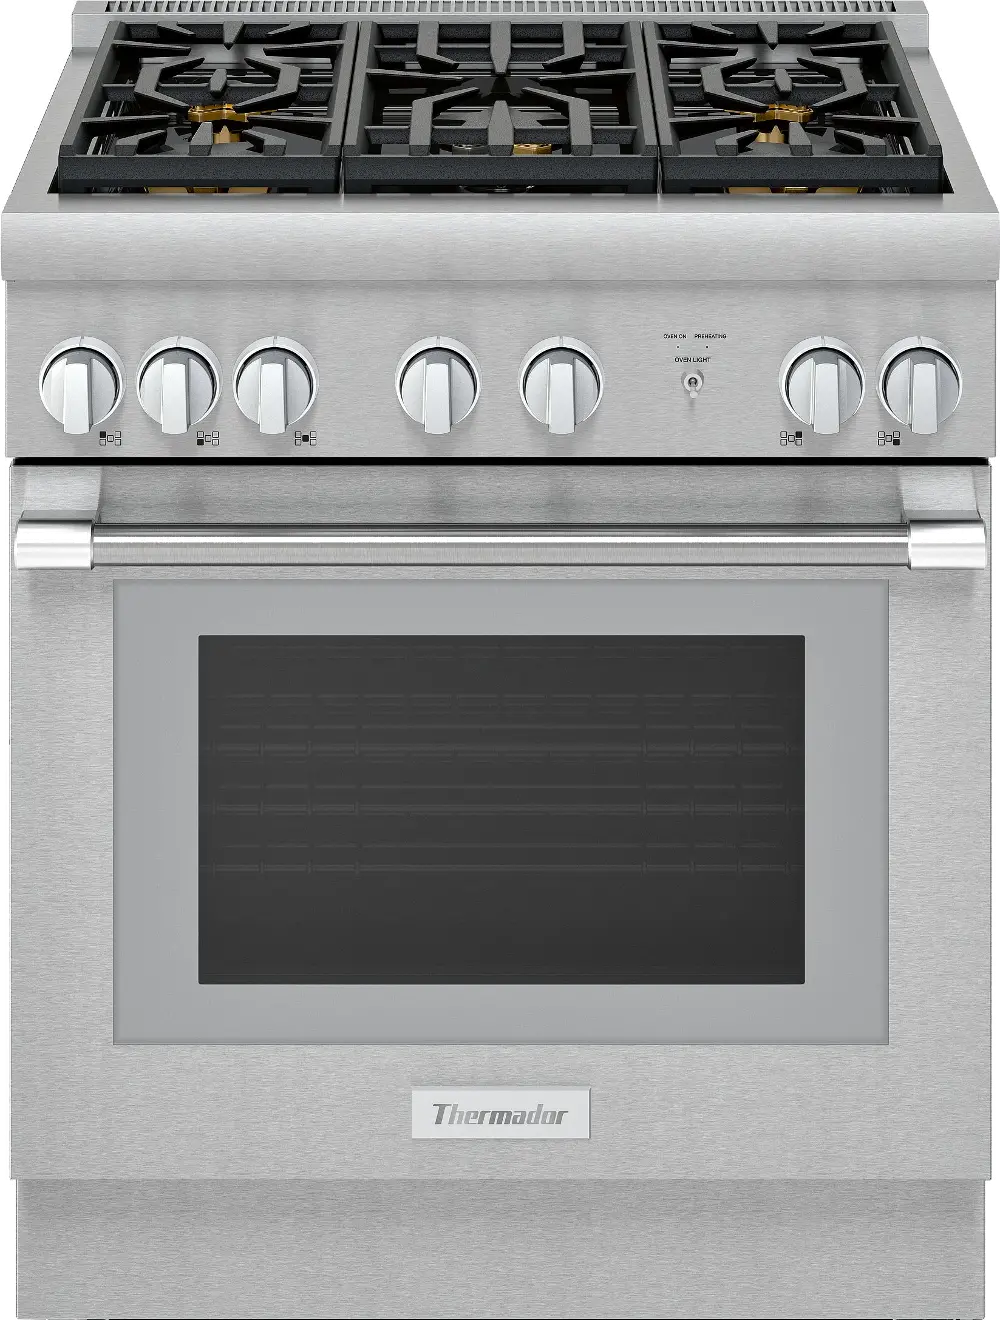 PRG305WH Thermador 30 Inch Pro Harmony Convection Gas Range - 3.6 cu. ft., Stainless Steel-1